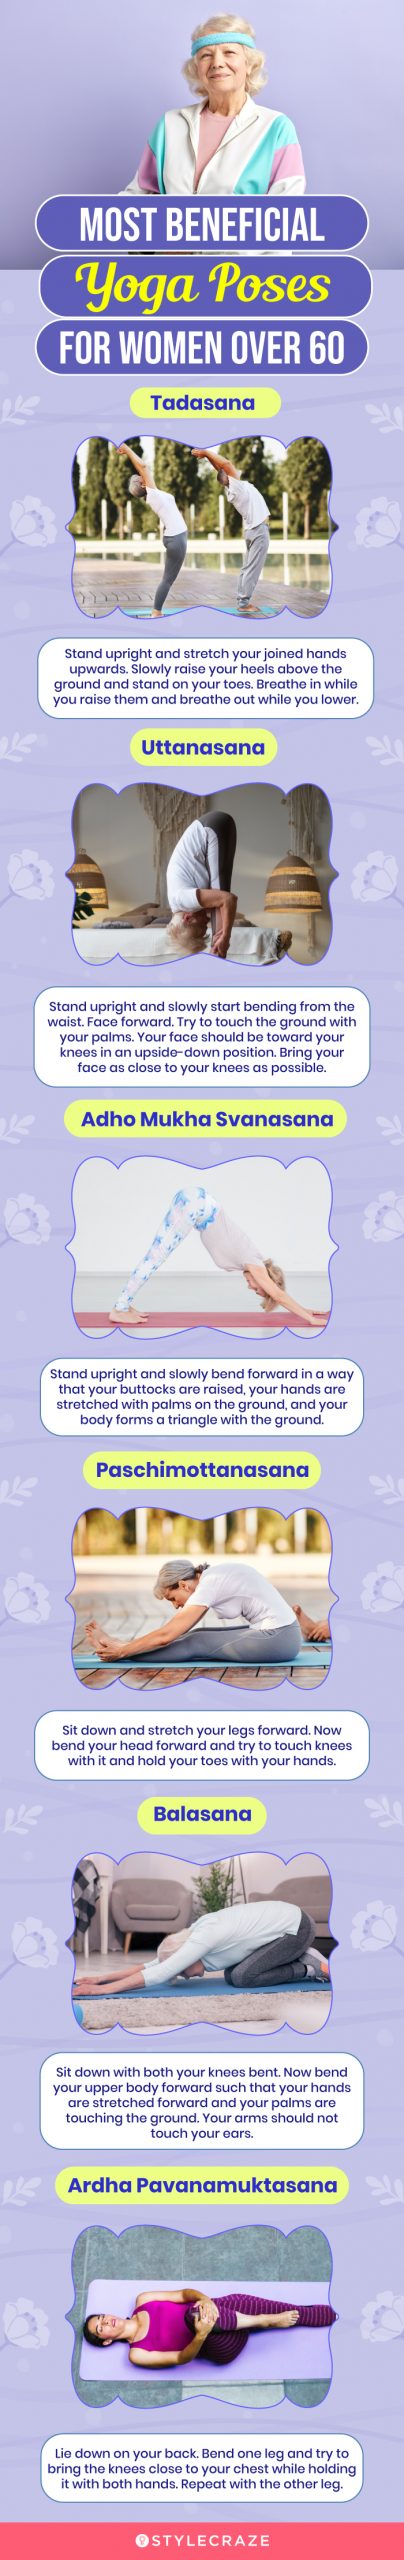 most beneficial yoga poses for women over 60 (infographic)